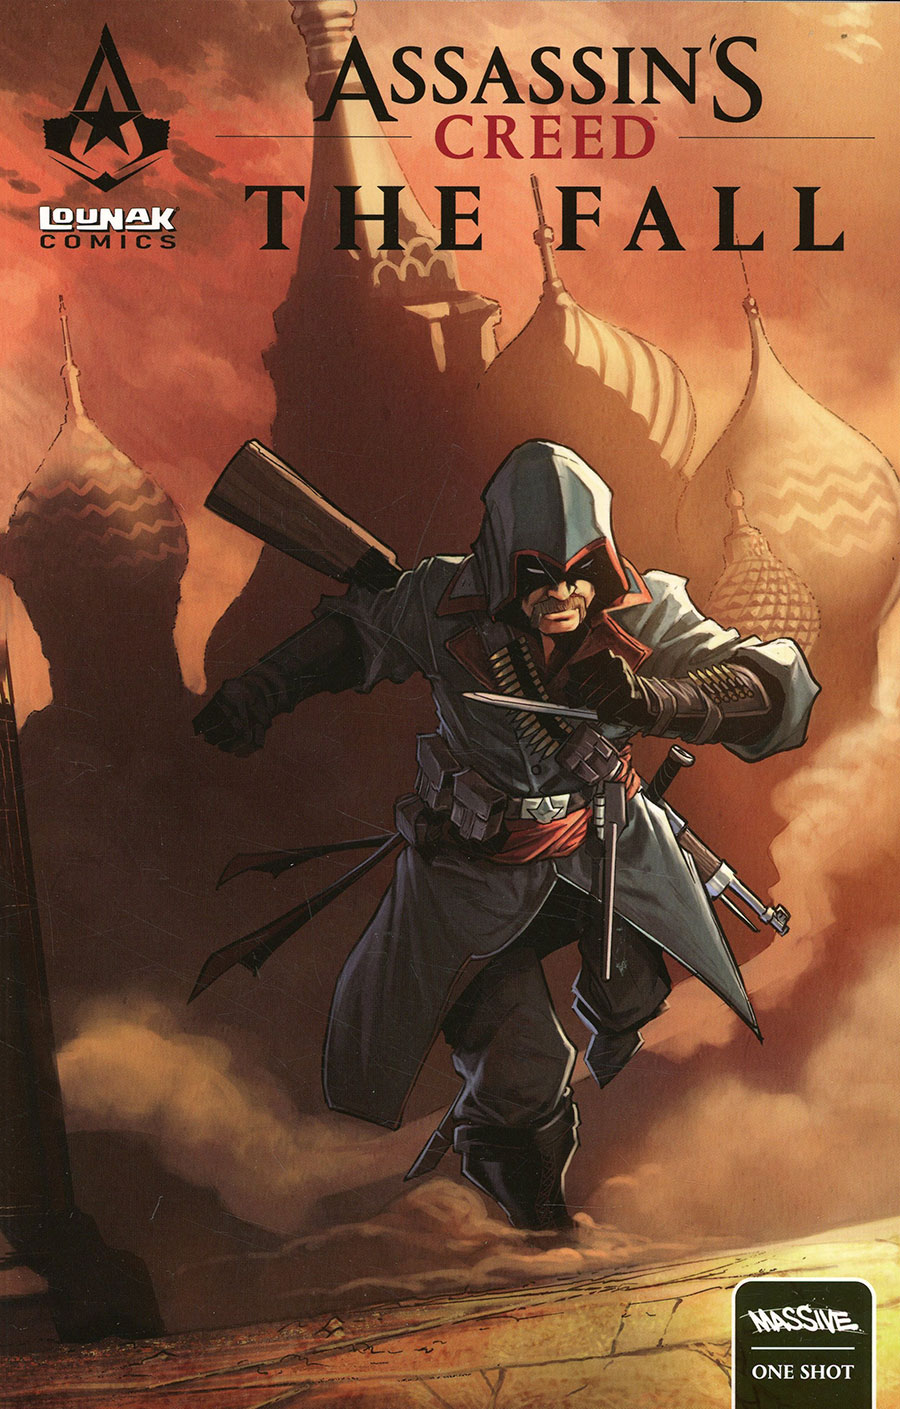 Assassins Creed The Fall #1 (One Shot) Cover B Variant Patrick Boutin-Gagne Cover